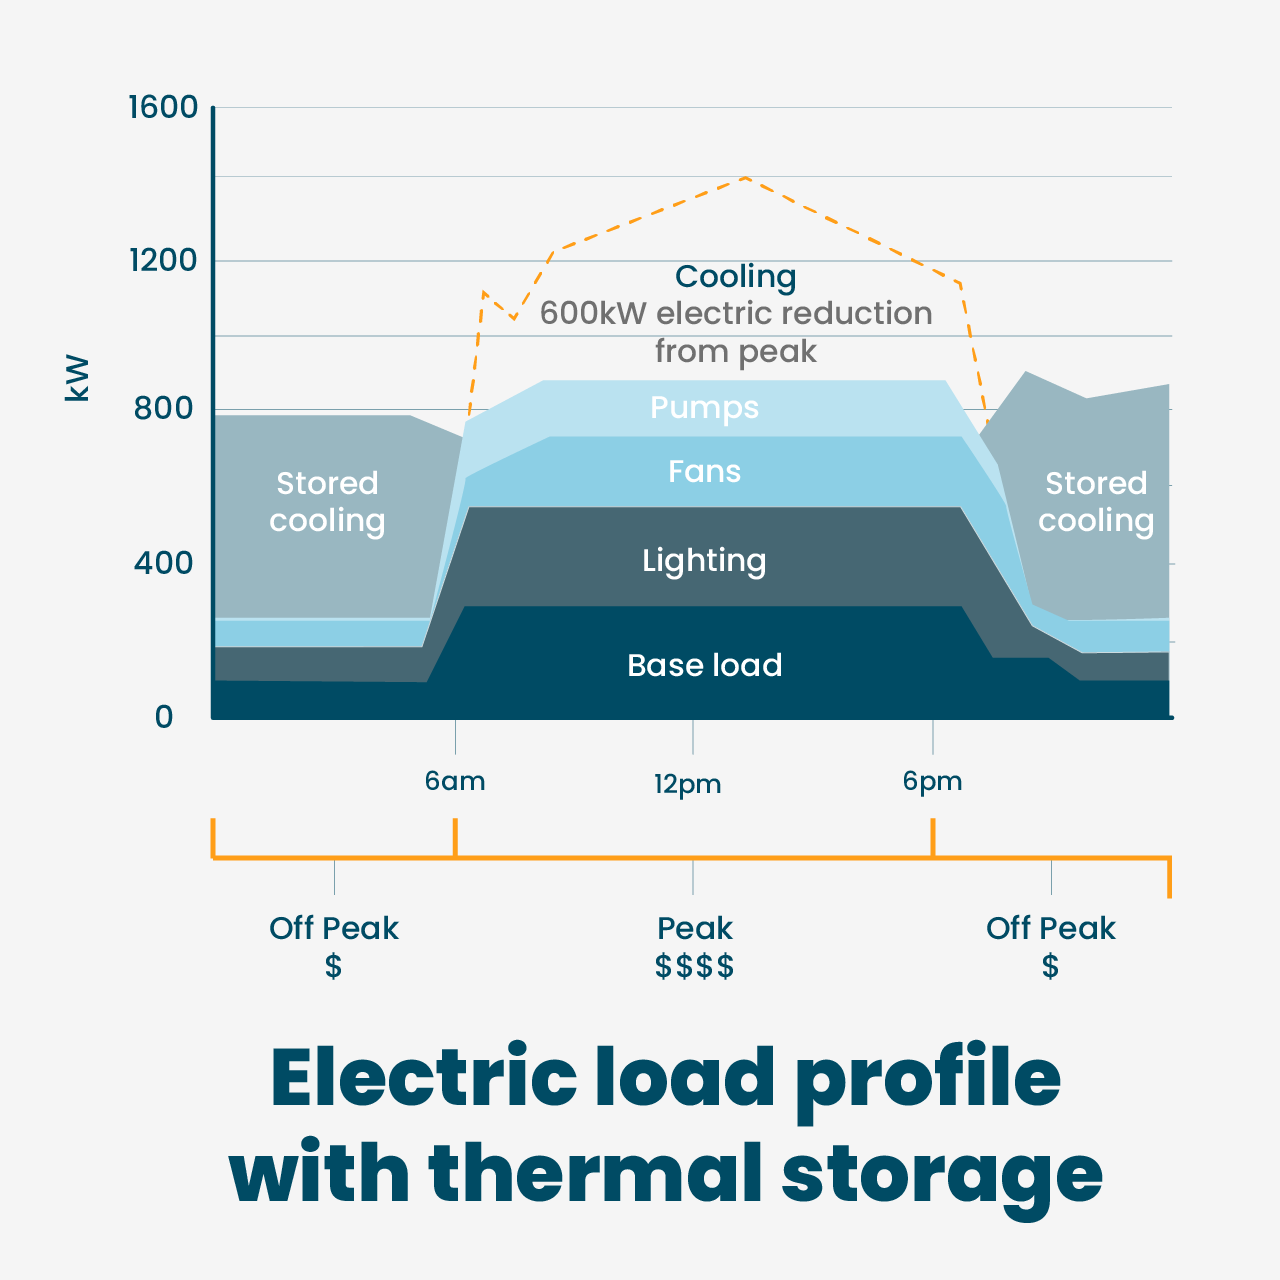 Electric load profile with thermal storage